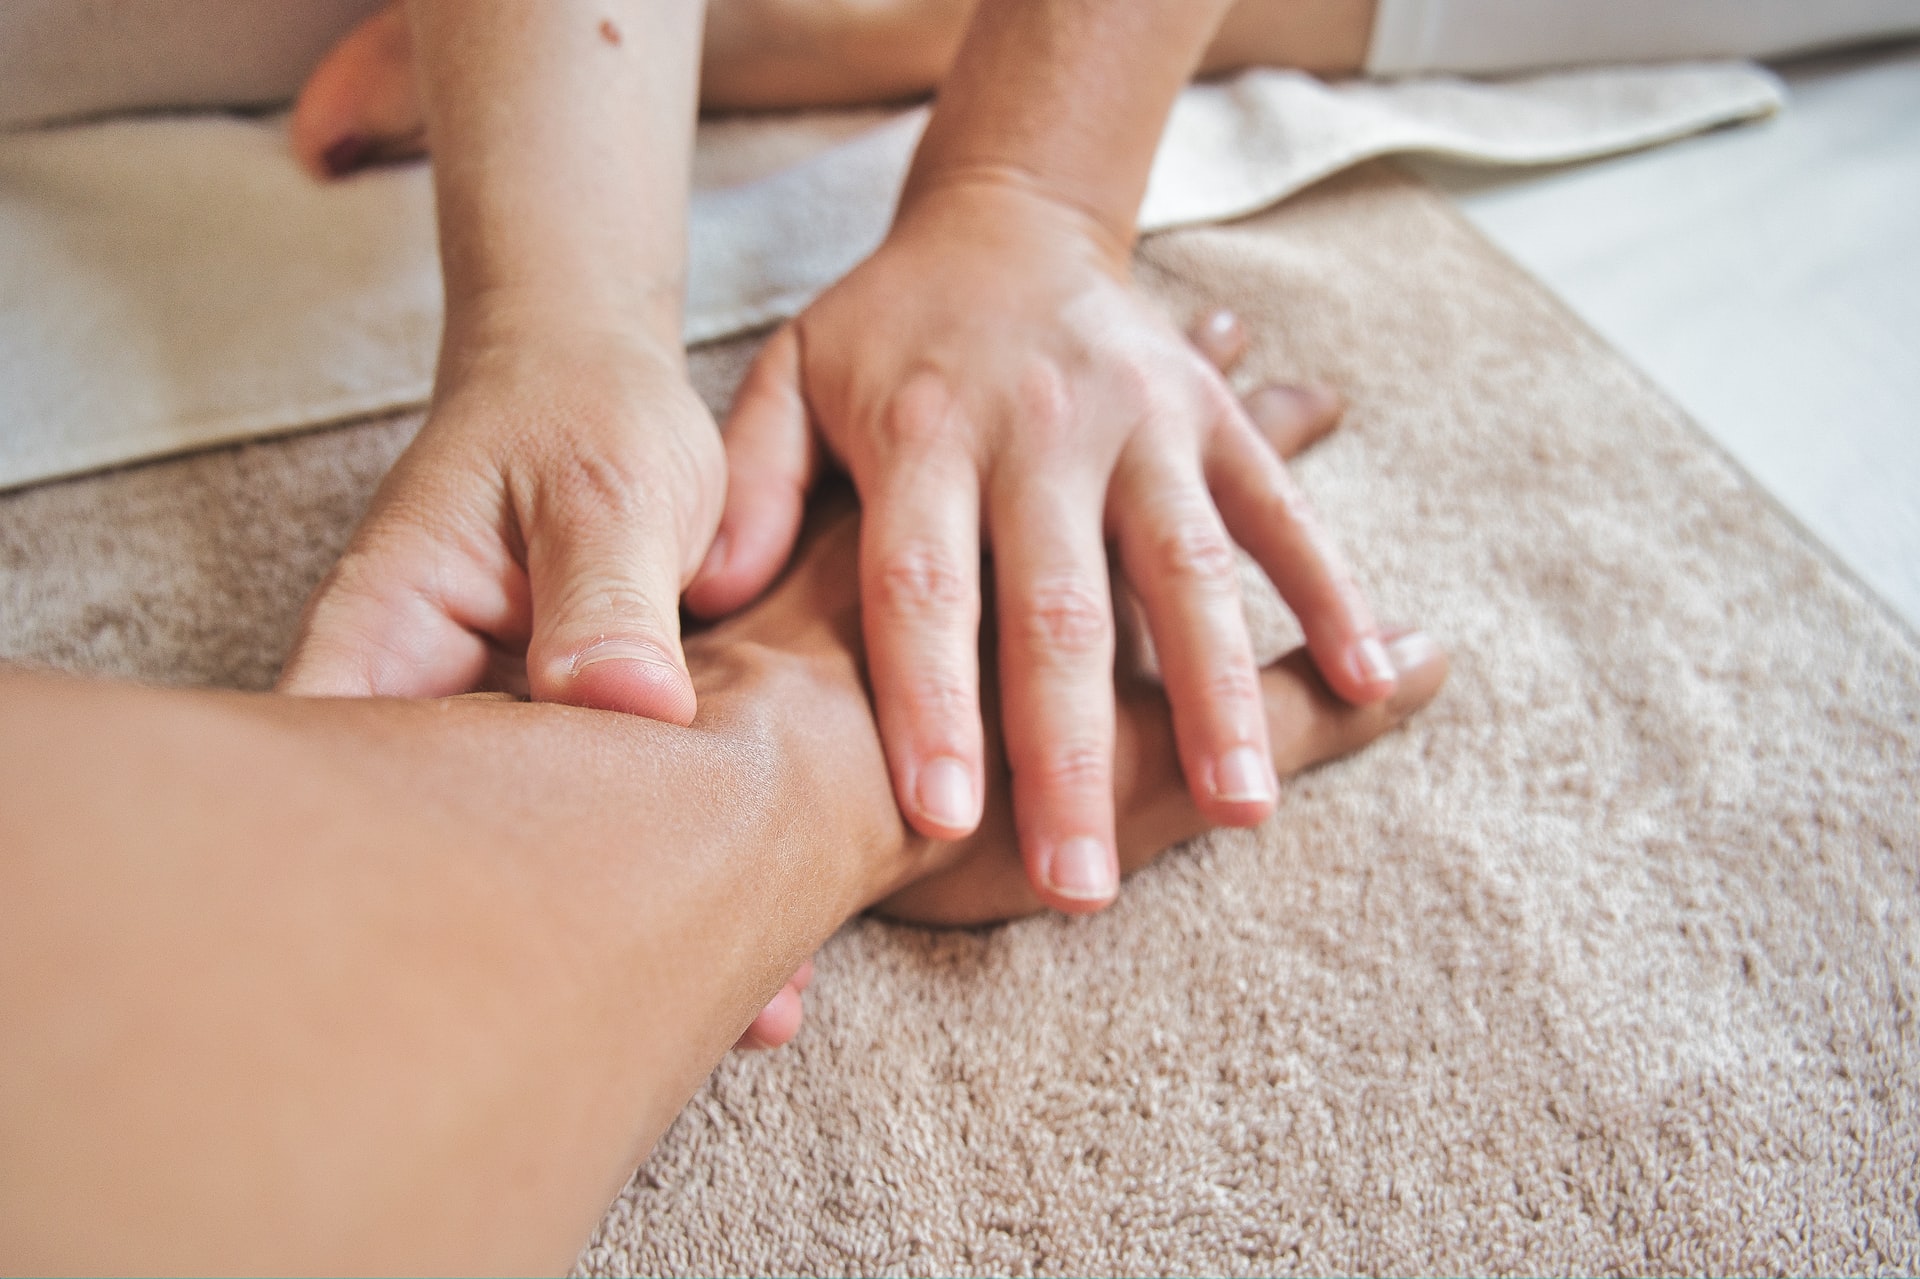 Need a little relaxation? Check out what Hawaiian lomi lomi massage is all about